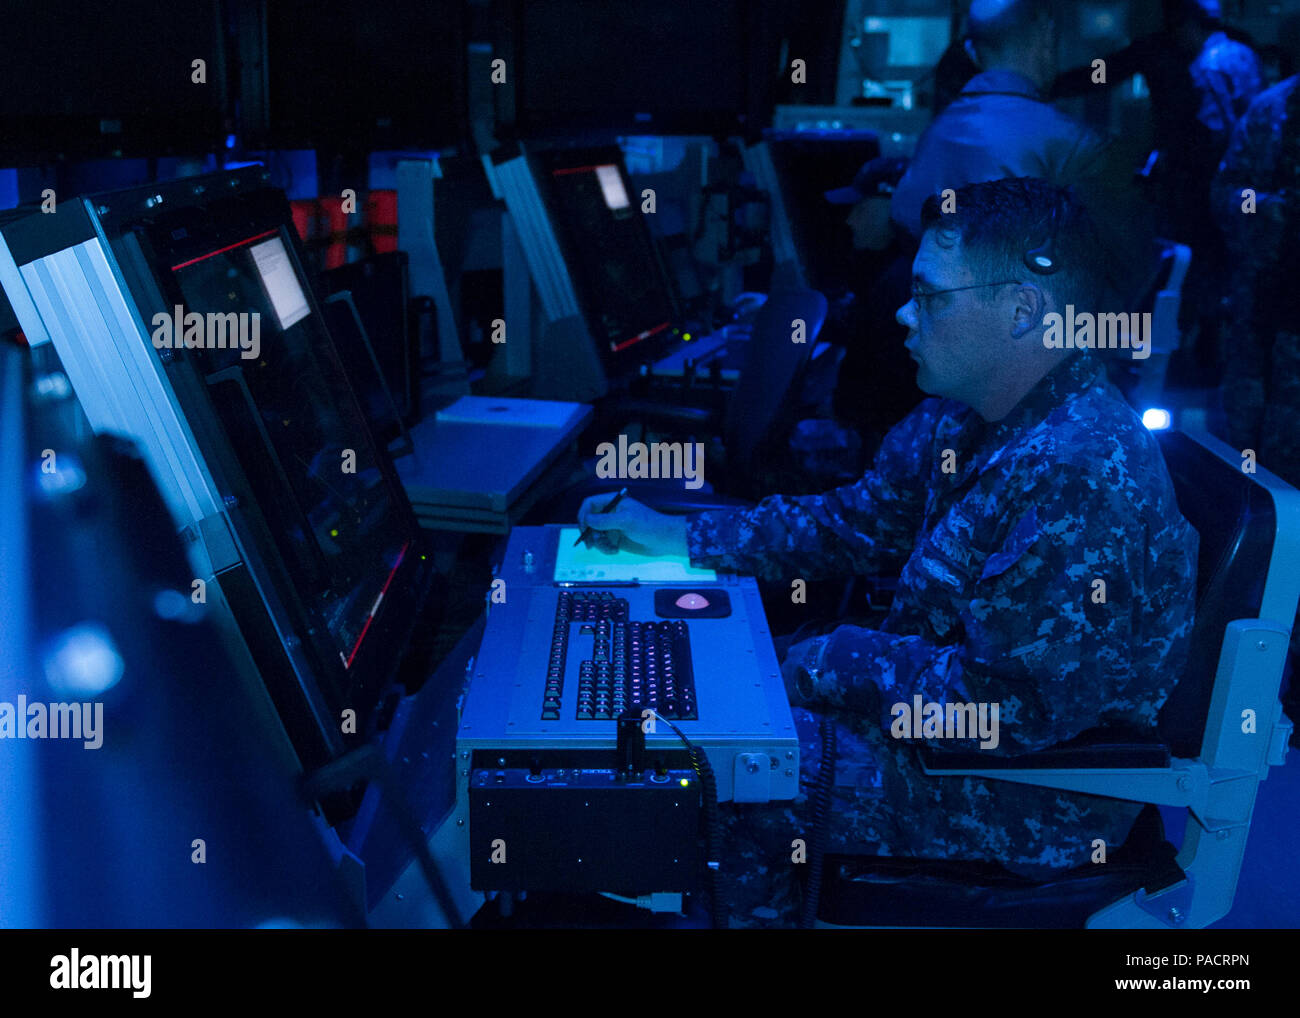 160322-N-DI878-070 (March 22, 2016) SAN DIEGO – USS Carl Vinson (CVN 70) Air Traffic Controller 1st Class  David Shoemaker demonstrates the first air traffic control simulator installed on board a Navy aircraft carrier in the aircraft carrier USS Carl Vinson air traffic control center (CATCC). Carl Vinson is currently pierside in its homeport of San Diego. (U.S. Navy photo by Mass Communication Specialist 3rd Class Giovanni Squadrito/Released) Stock Photo